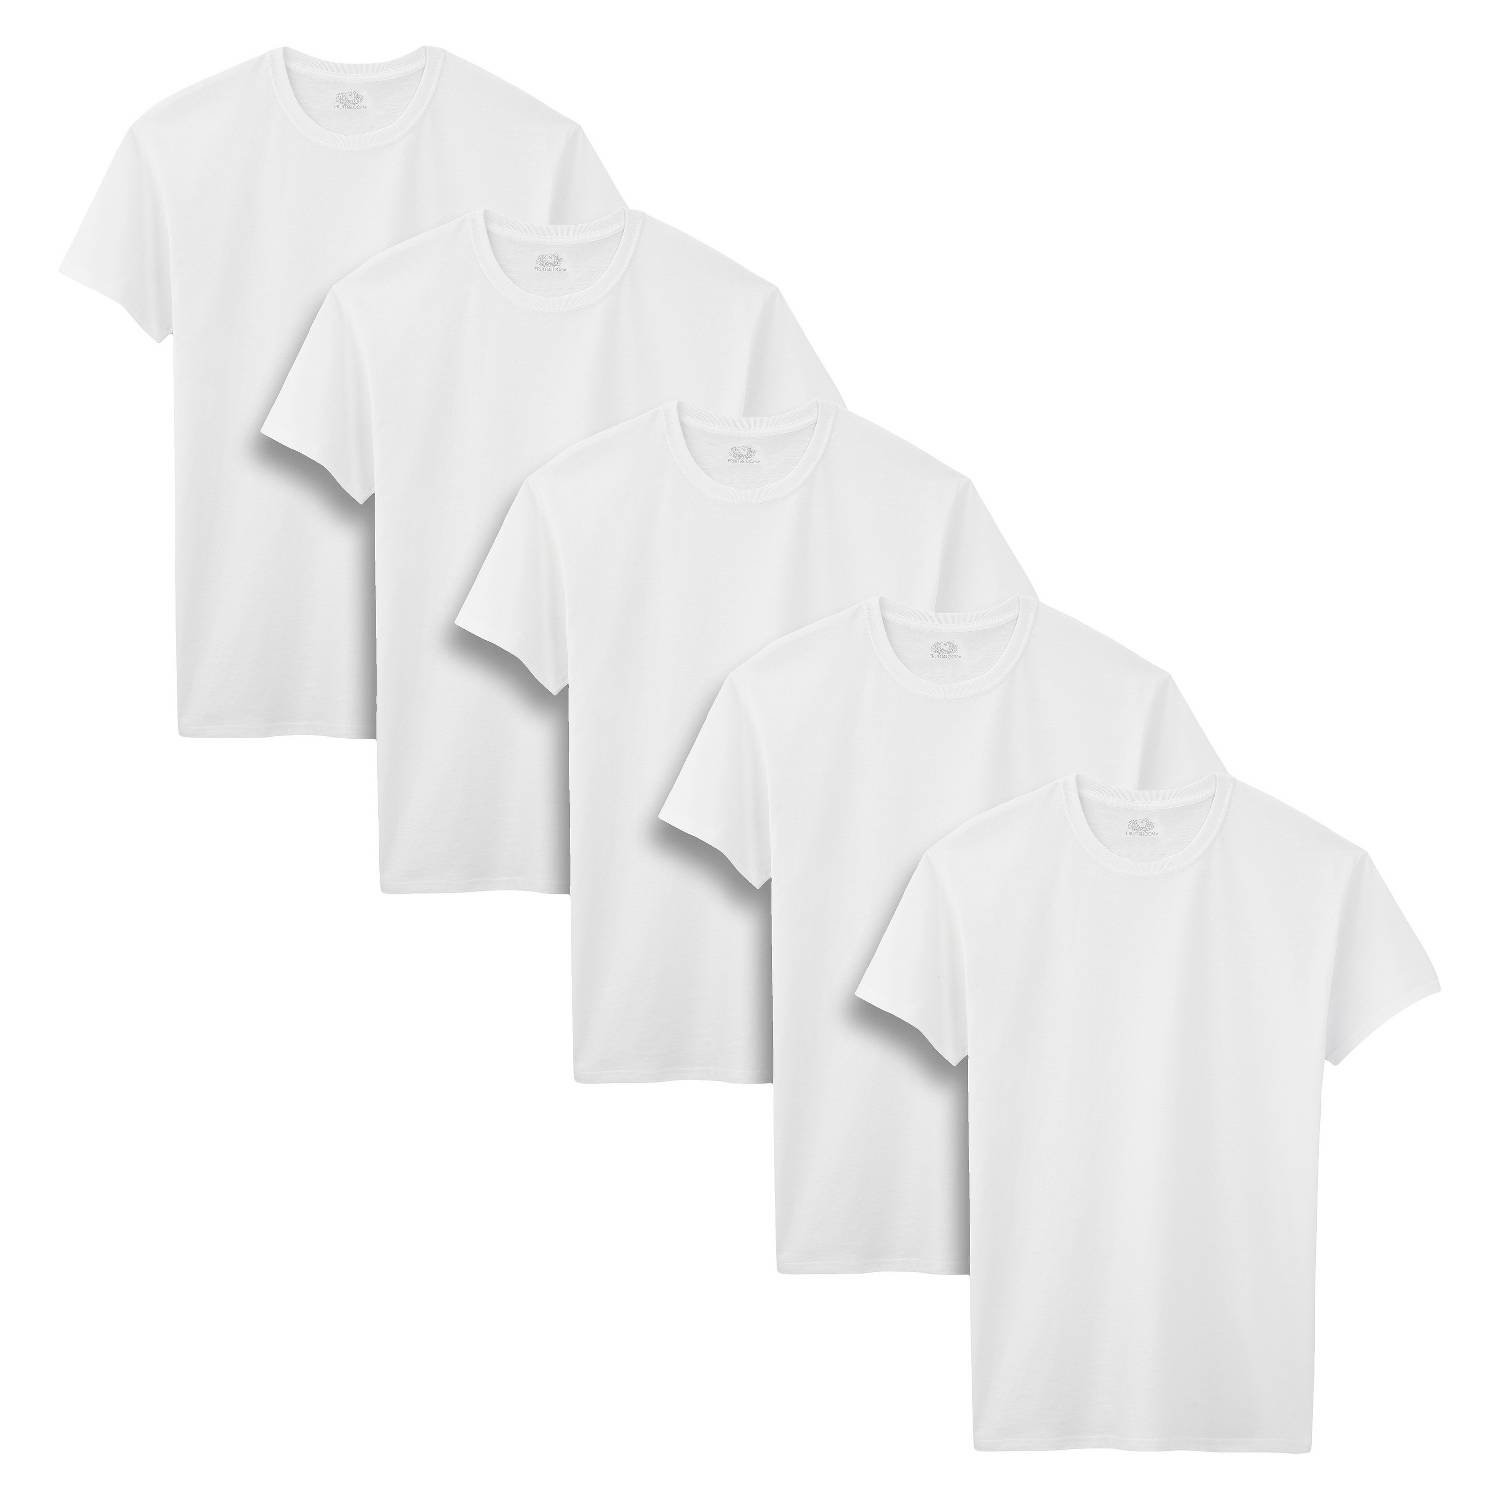 Today only: Boys Fruit of the Loom 5-pack of t-shirts for $6